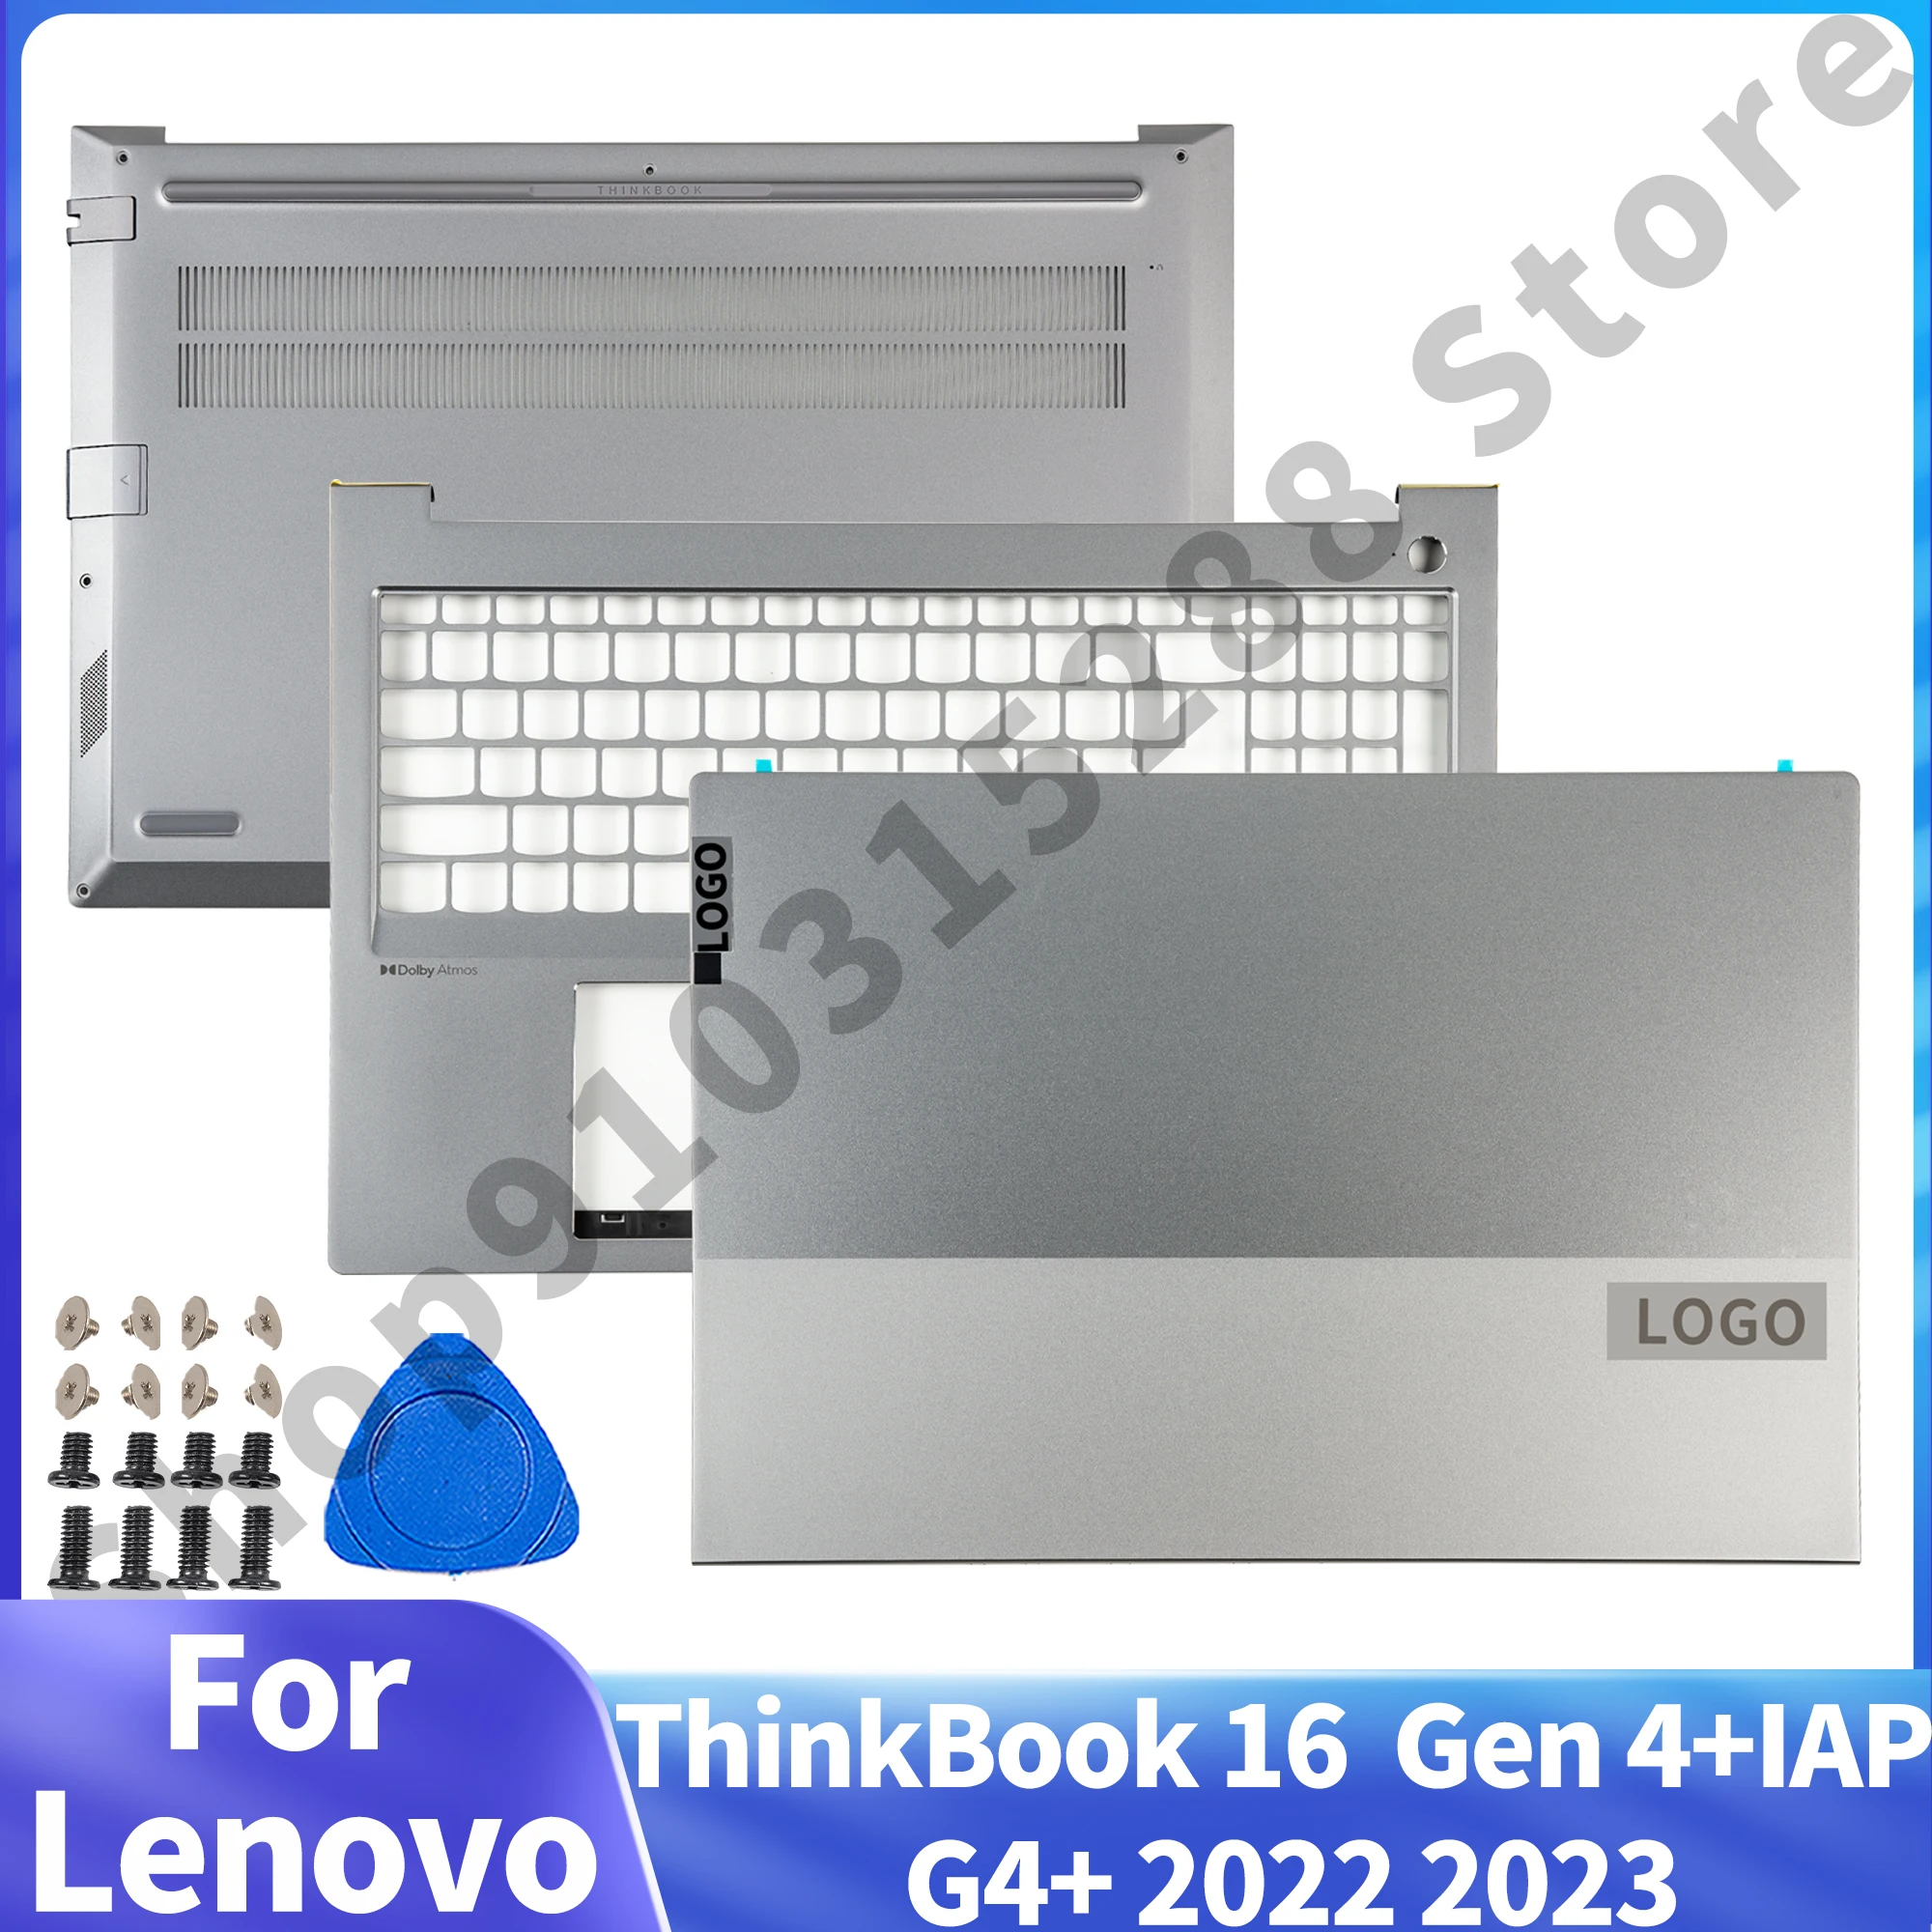 

New For Lenovo ThinkBook 16 G4+ ARA Gen 4+IAP 2022 Back Cover Palmrest Bottom Case Notebook Parts Replace Gray Metal Rear Top